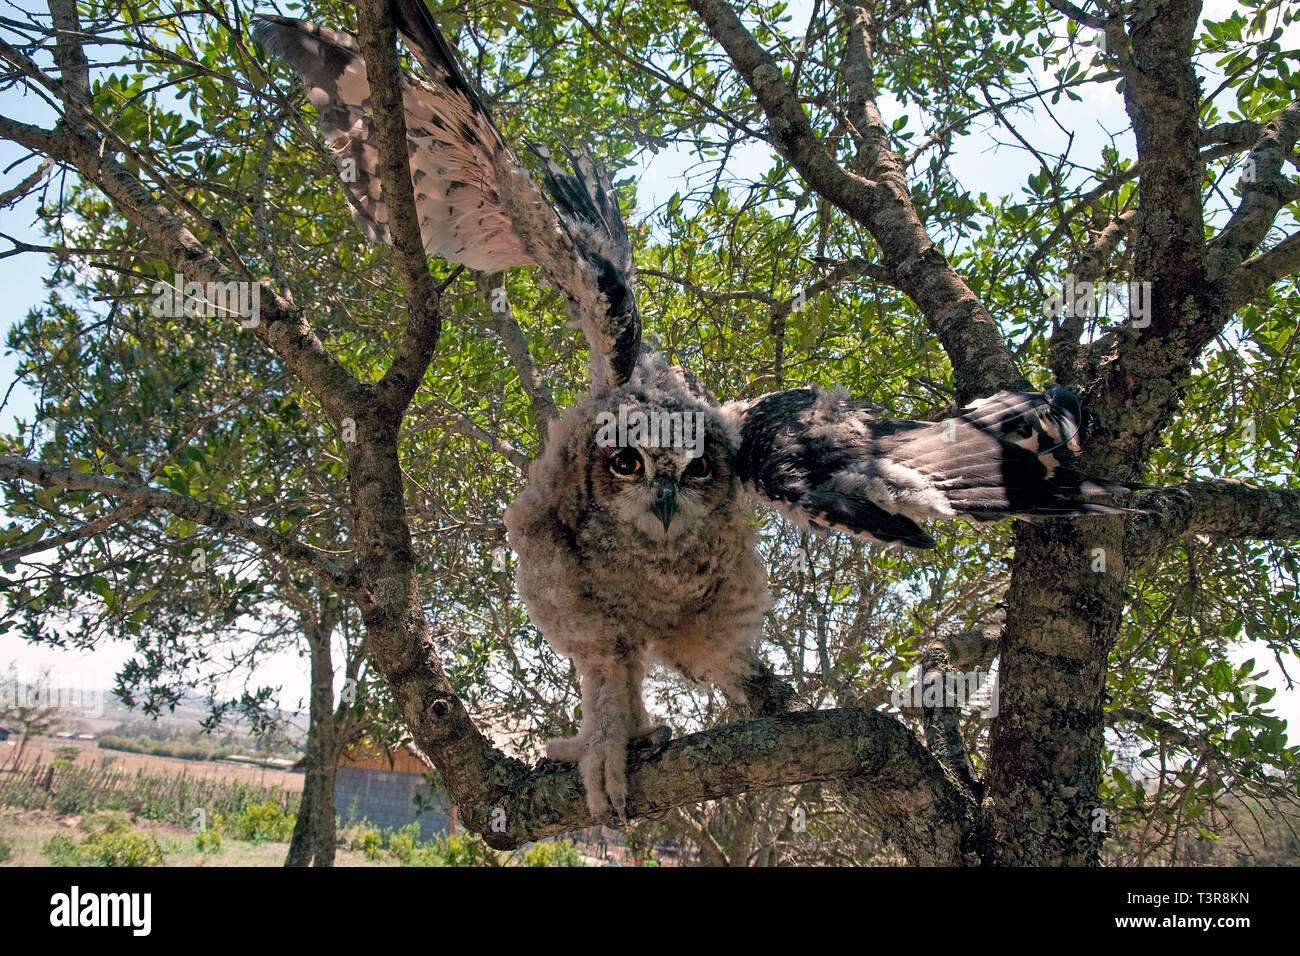 Giant Eagle Owl, Verreaux's eagle-owl or milky eagle owl (Bubo lacteus), starting flight from a branch of a tree, Amboseli, Kenia, Africa Stock Photo